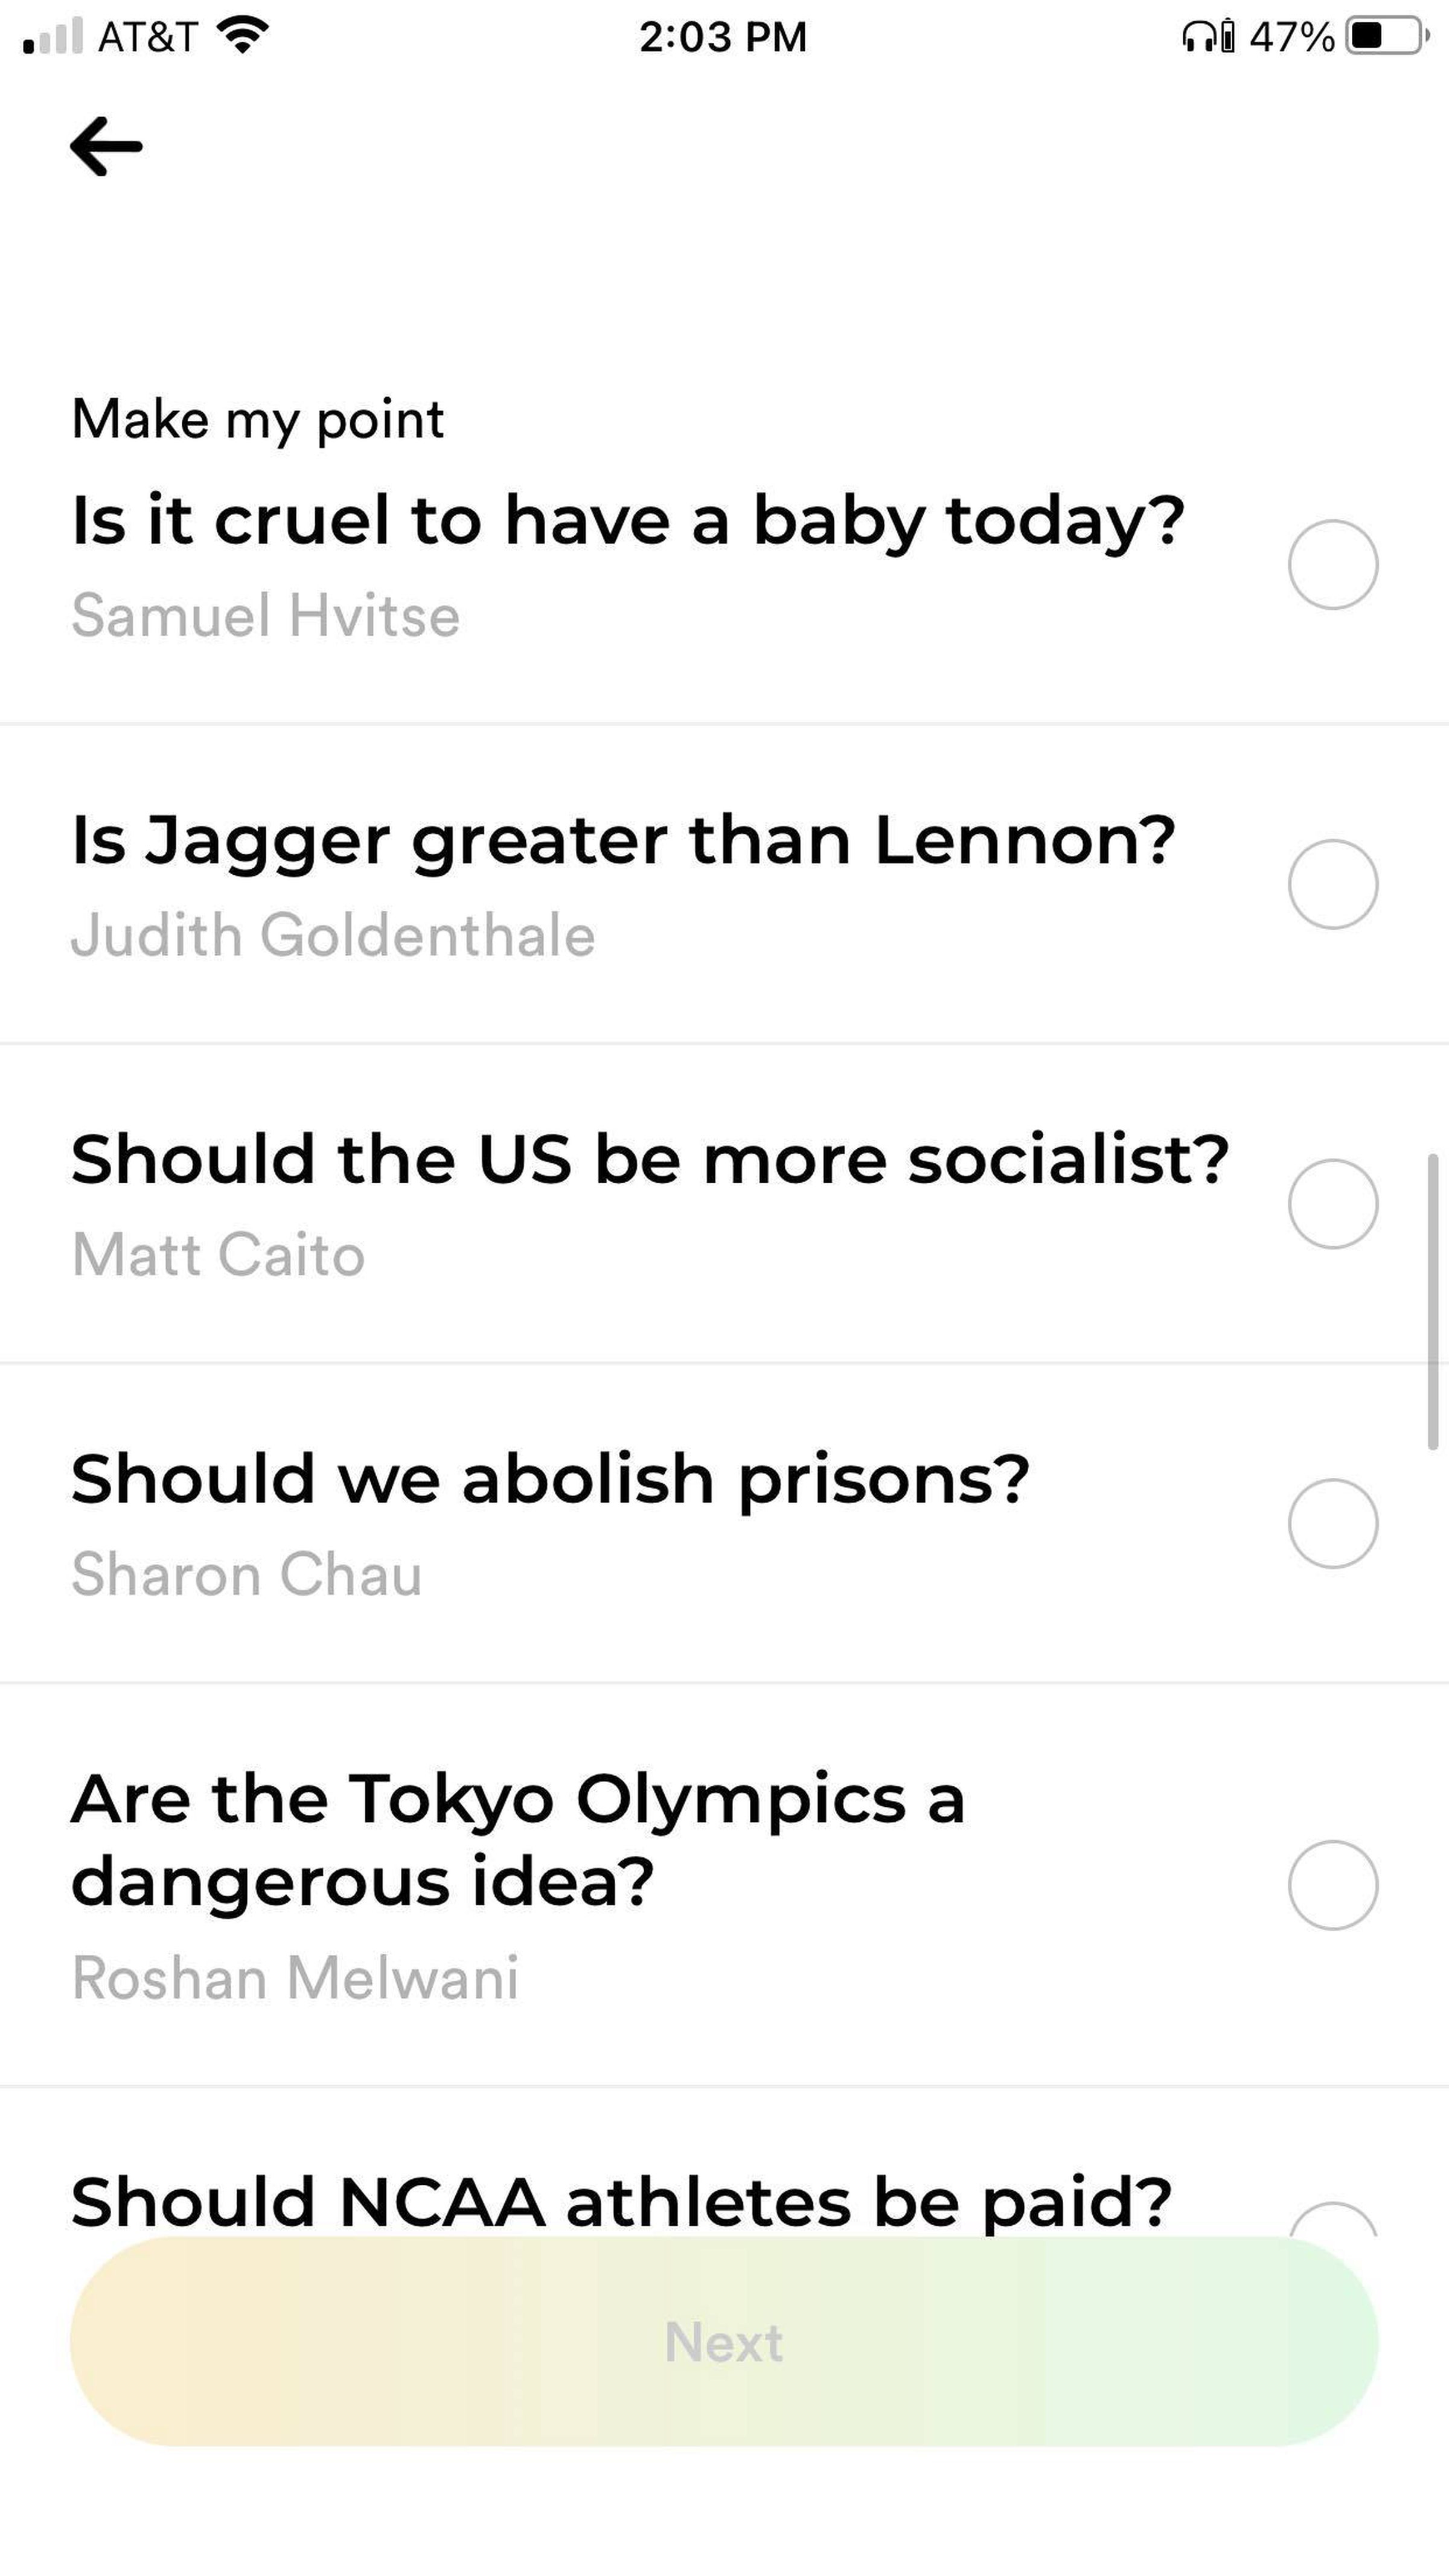 A screenshot of Polemix’s list of debatable questions. Each leader is credited for their question. Questions include: Is it cruel to have a baby today (by Samuel Hvitse), Is Jagger greater than Lennon (by Judith Goldenthale), Should the US be more socialist (by Matt Caito), Should we abolish prisons (by Sharon Chau), Are the Tokyo Olympics a dangerous idea (by Roshan Melwani), and Should NCAA athletes be paid?